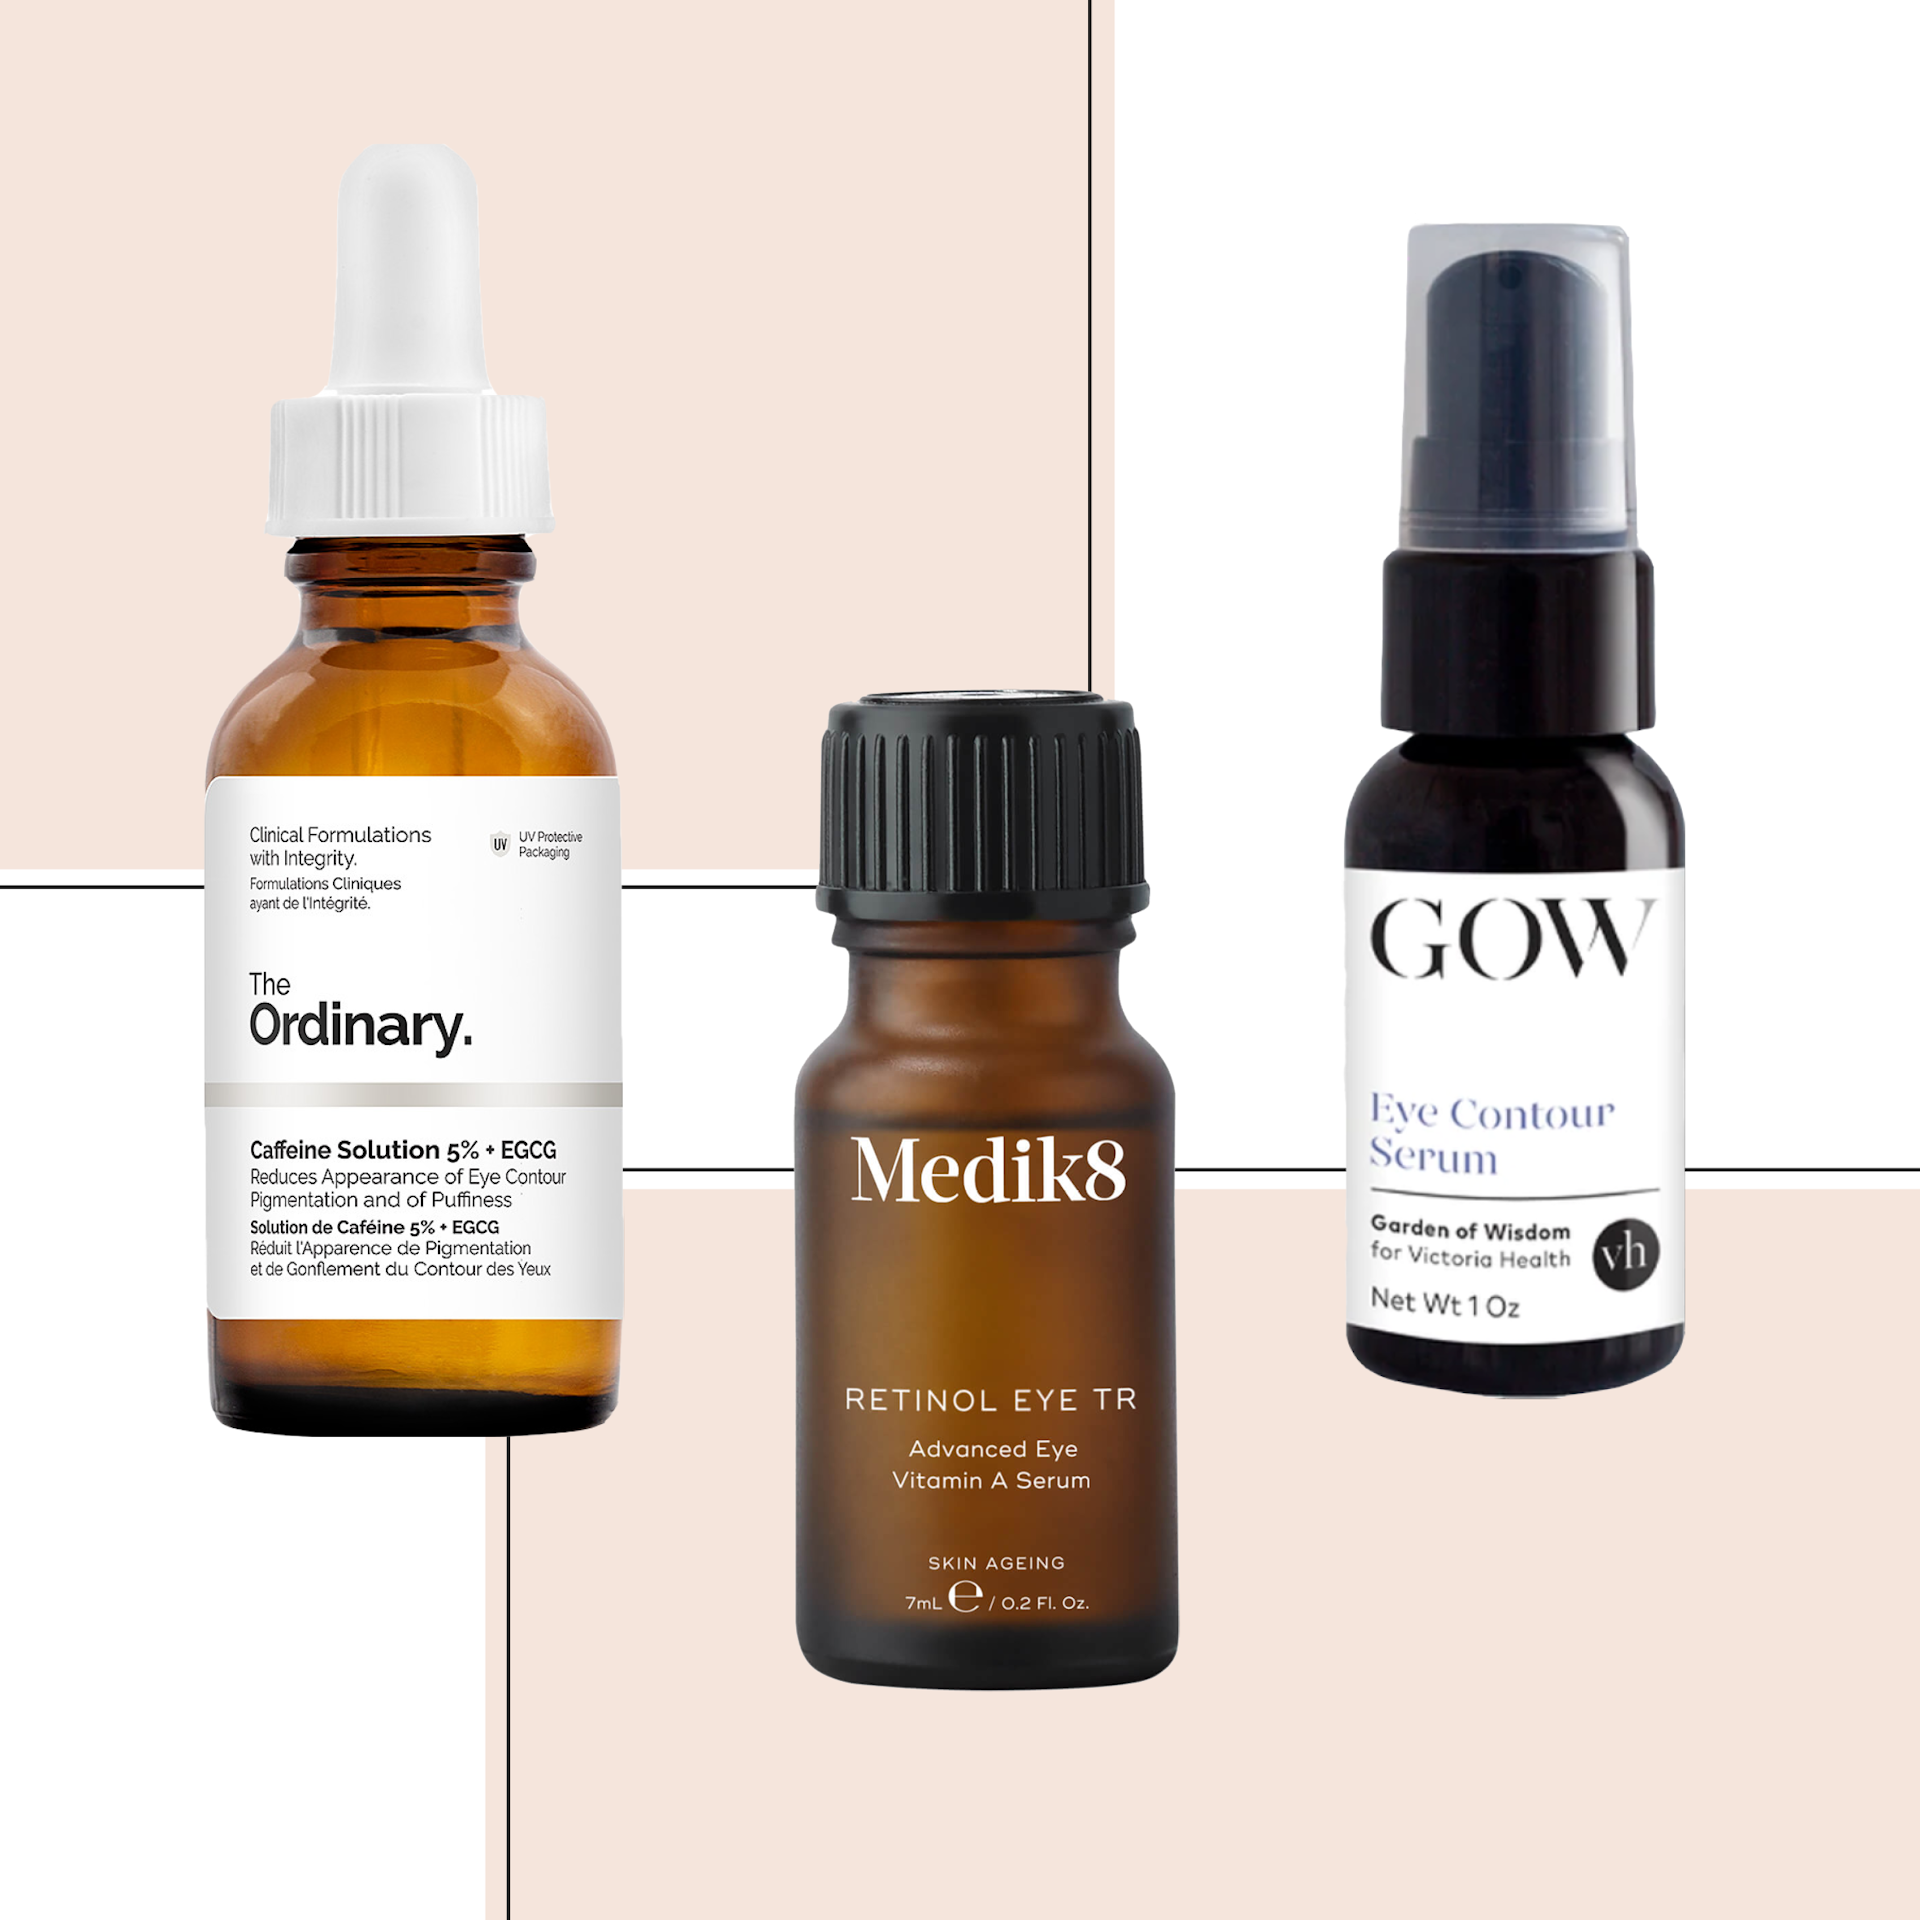 What Causes Dark Circles and Puffiness, and How Can Skincare Help?